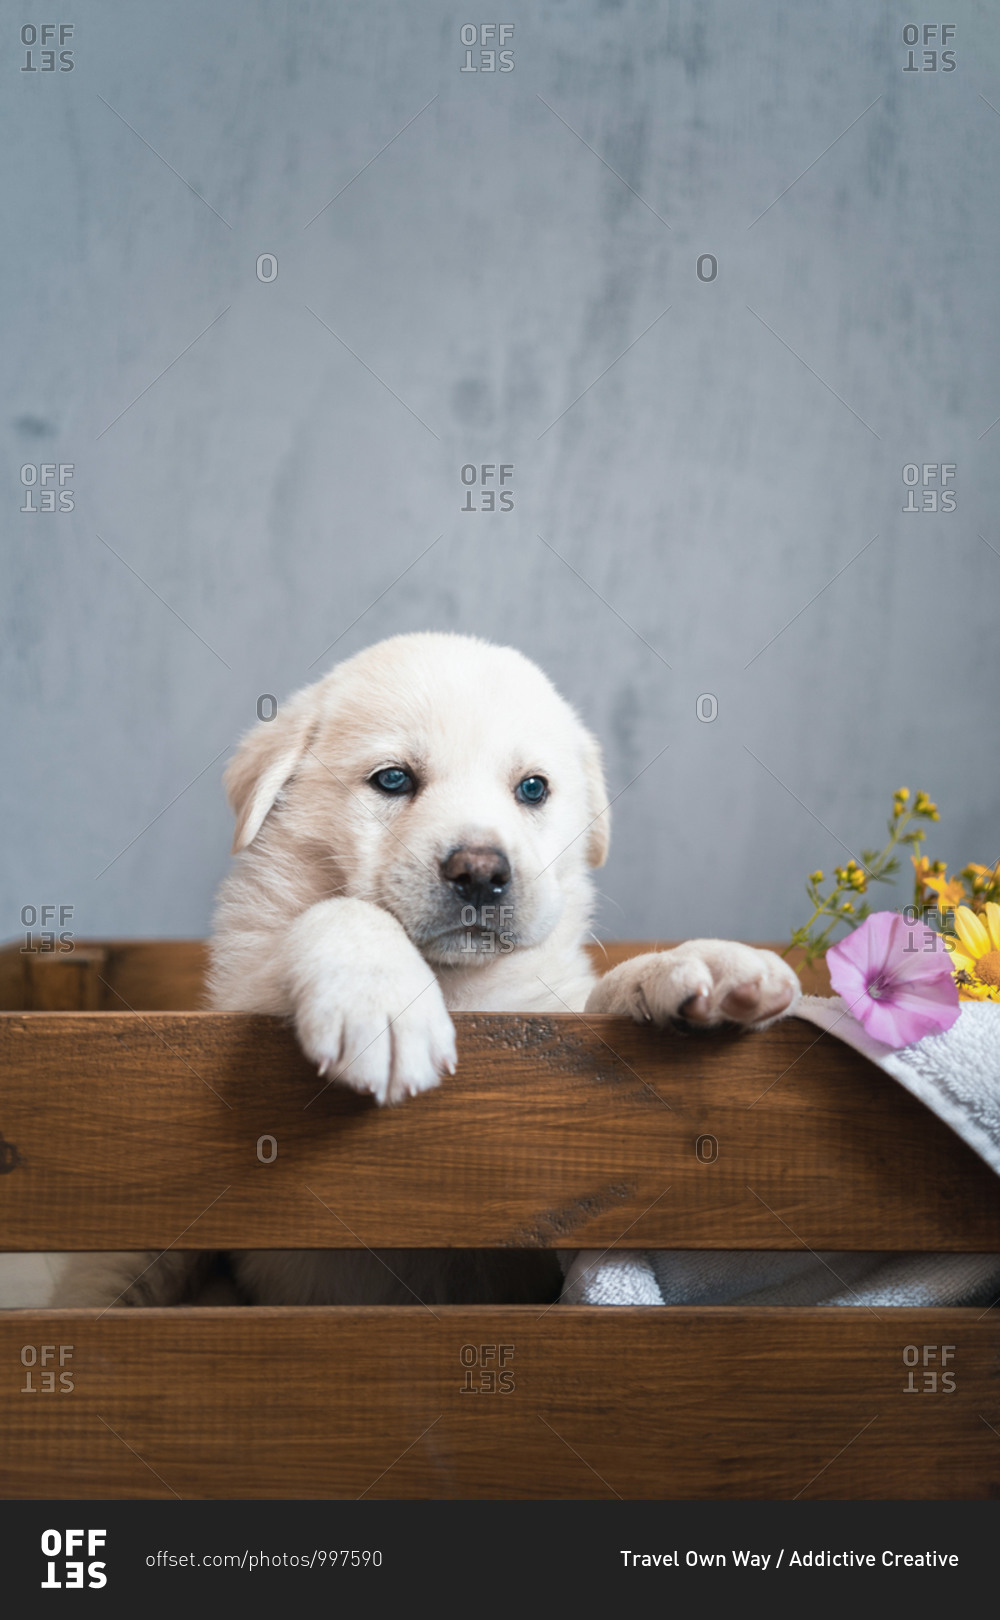 Cute pup of Golden Retriever sitting in wooden box with flowers in modern flat